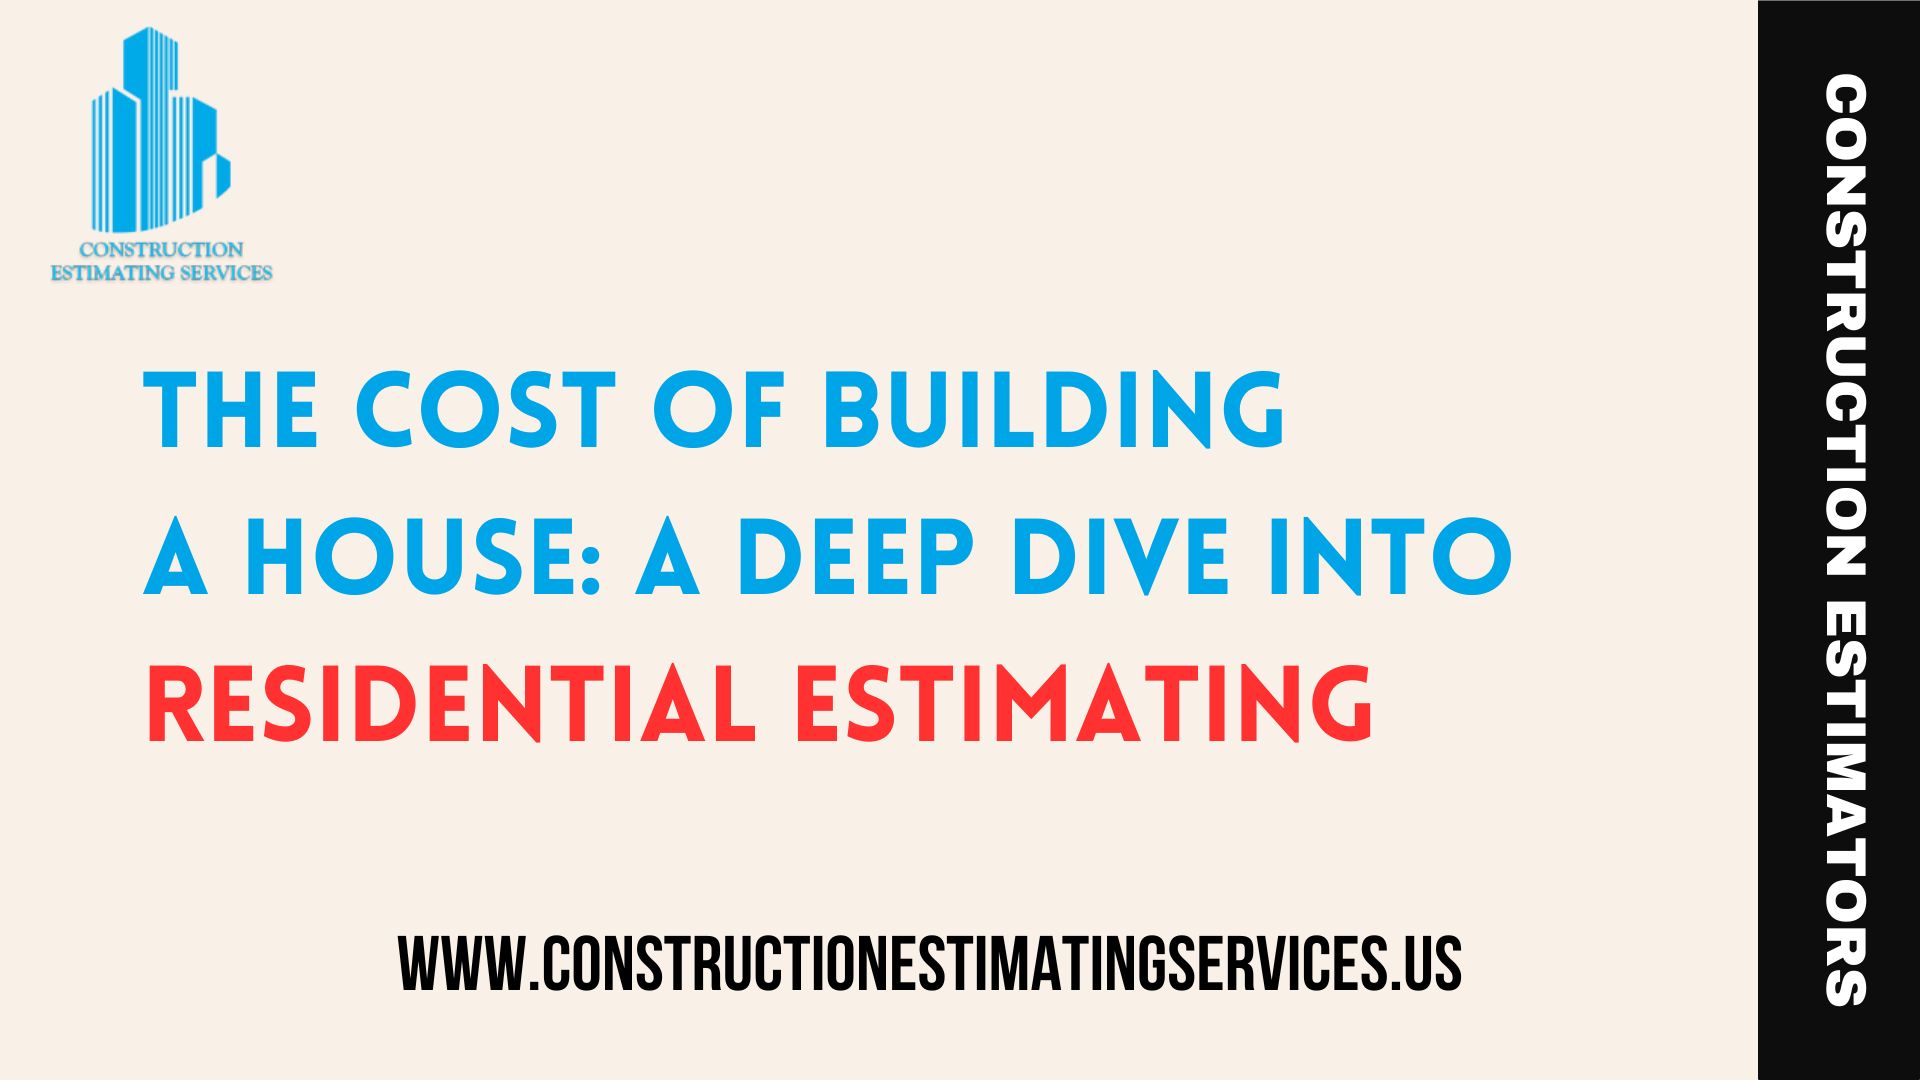 The Cost of Building a House: A Deep Dive into Residential Estimating